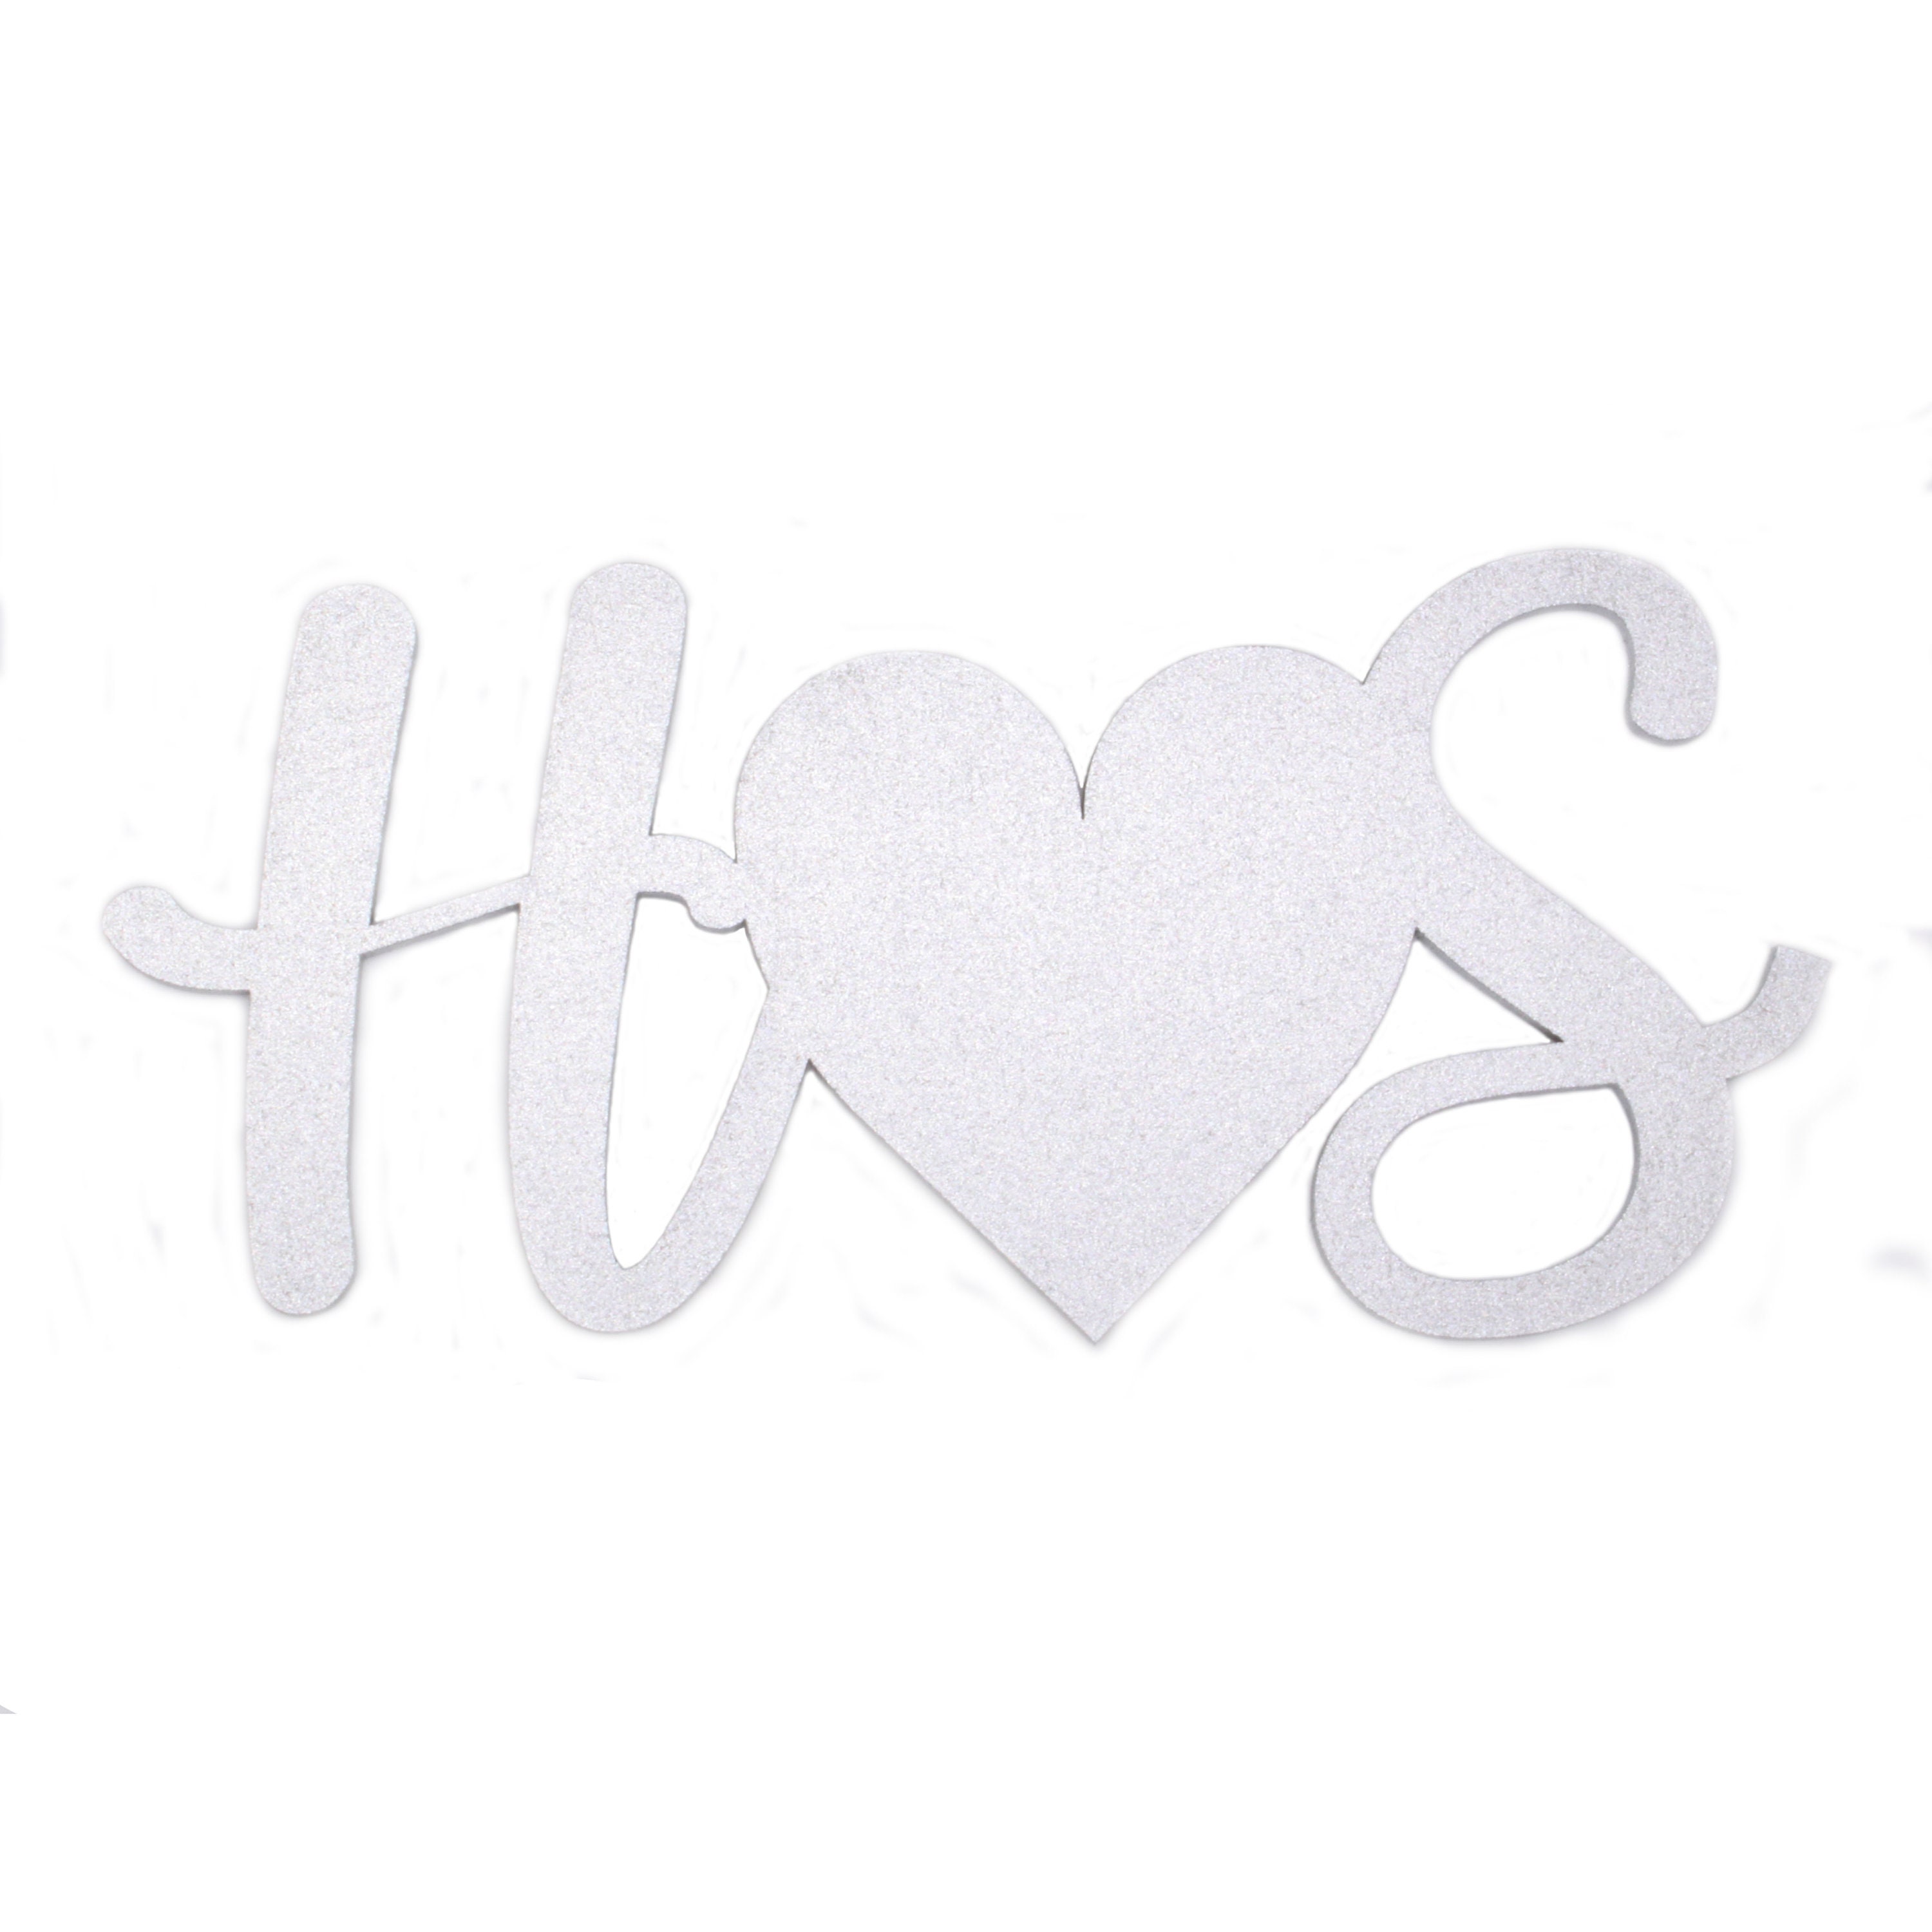 Personalised With Your Initials Adjoined Heart Silver Laser Cut From 3mm Mdf Wood | Your Initials Anniversary Gift Custom